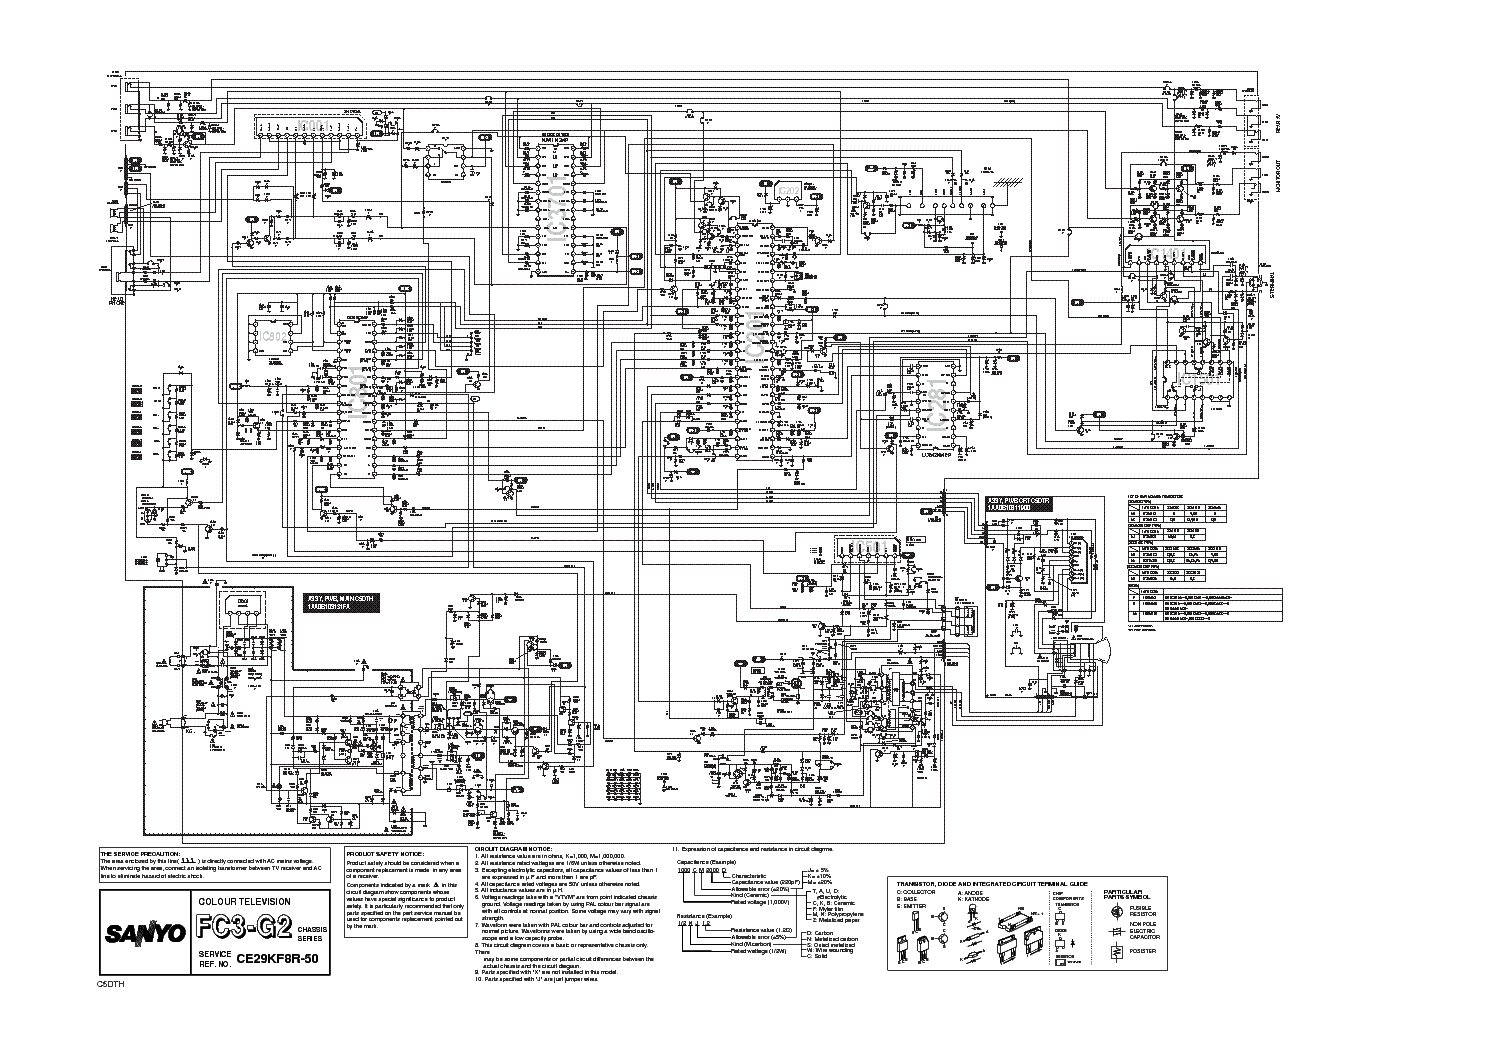 SANYO FC3-G2 CHASSIS SCH service manual (1st page)